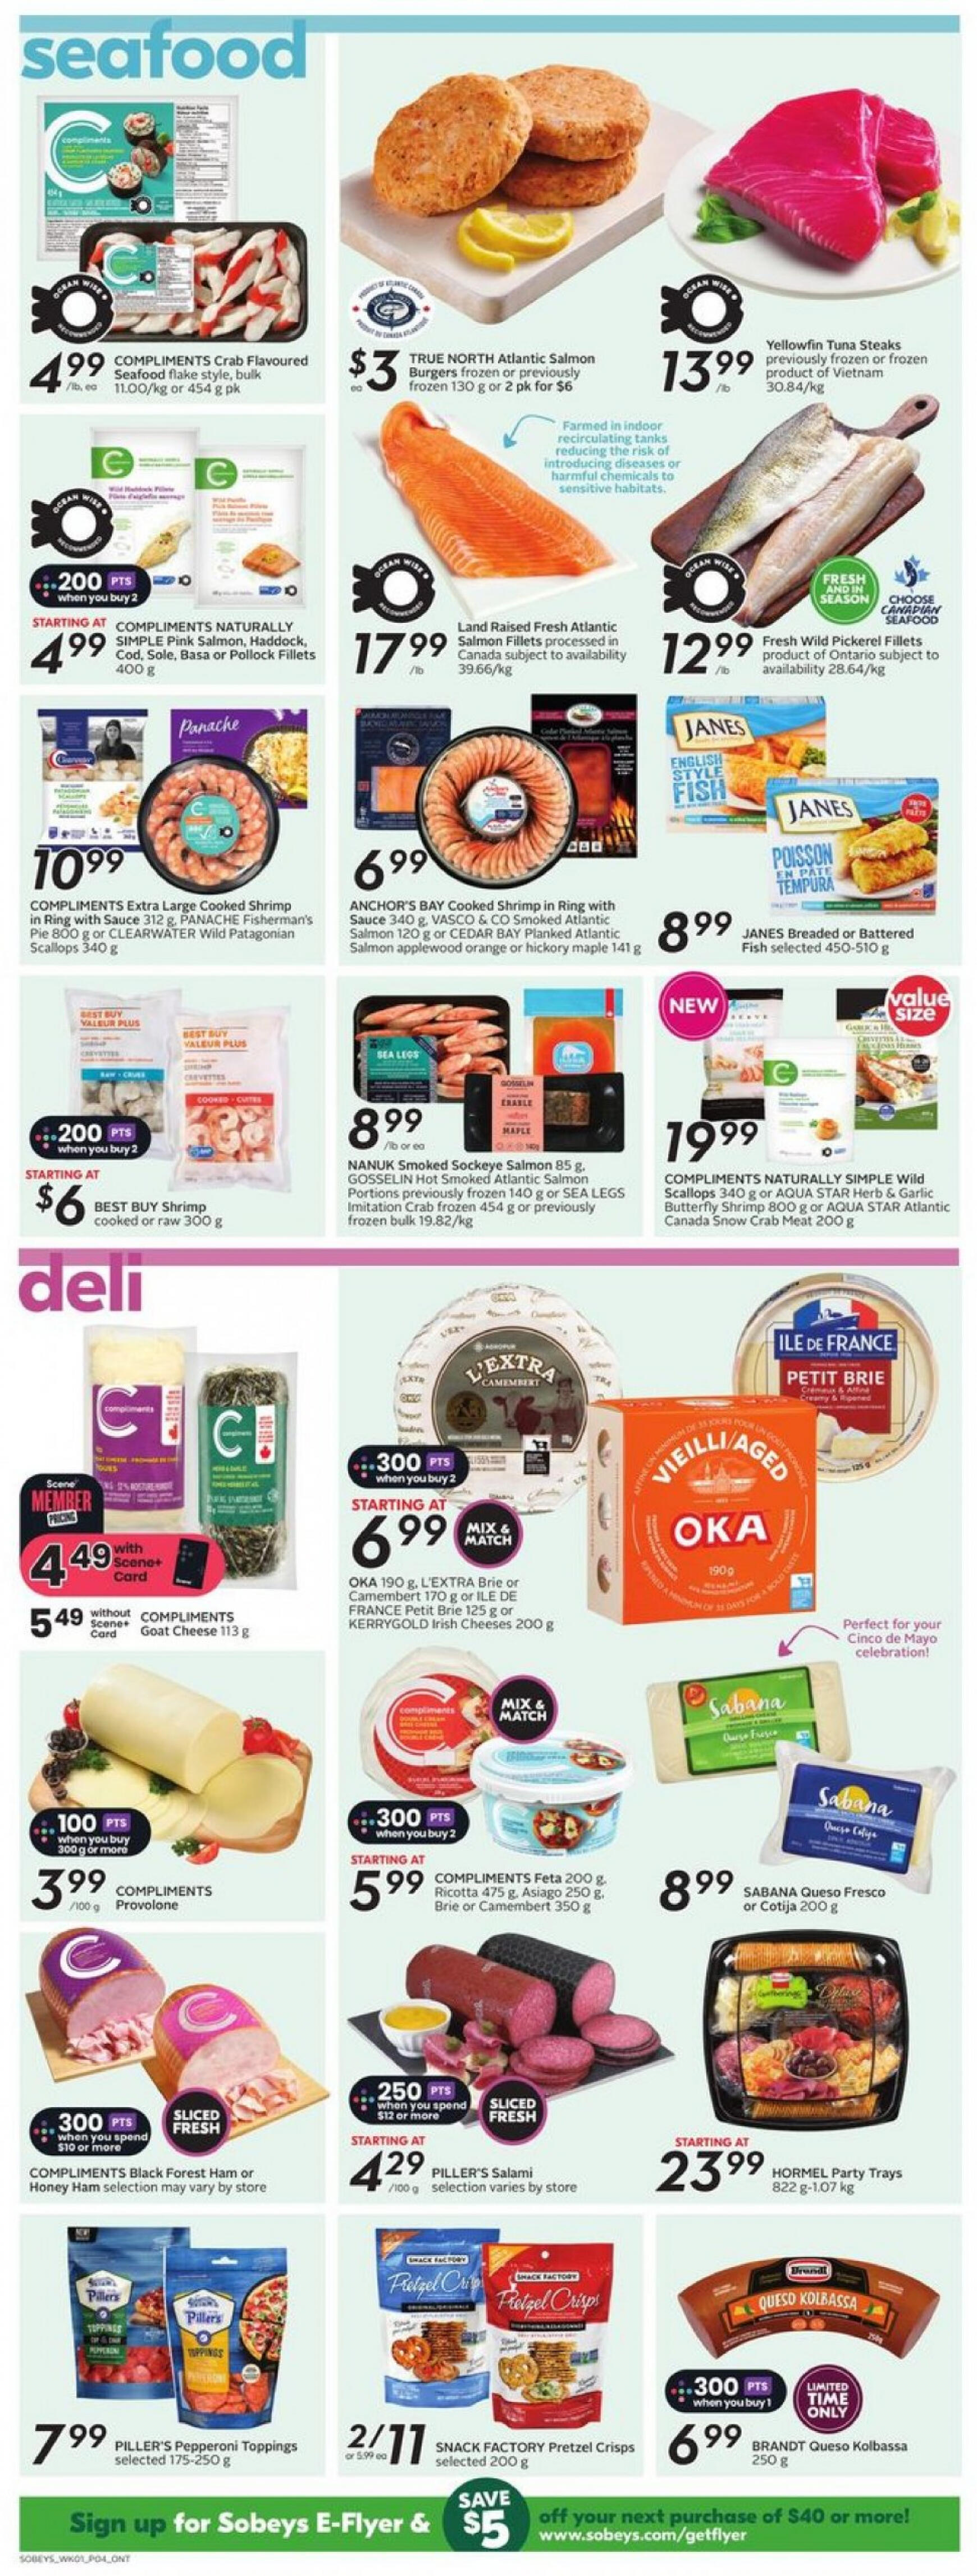 sobeys - Sobeys - Weekly Flyer - Ontario flyer current 02.05. - 08.05. - page: 8